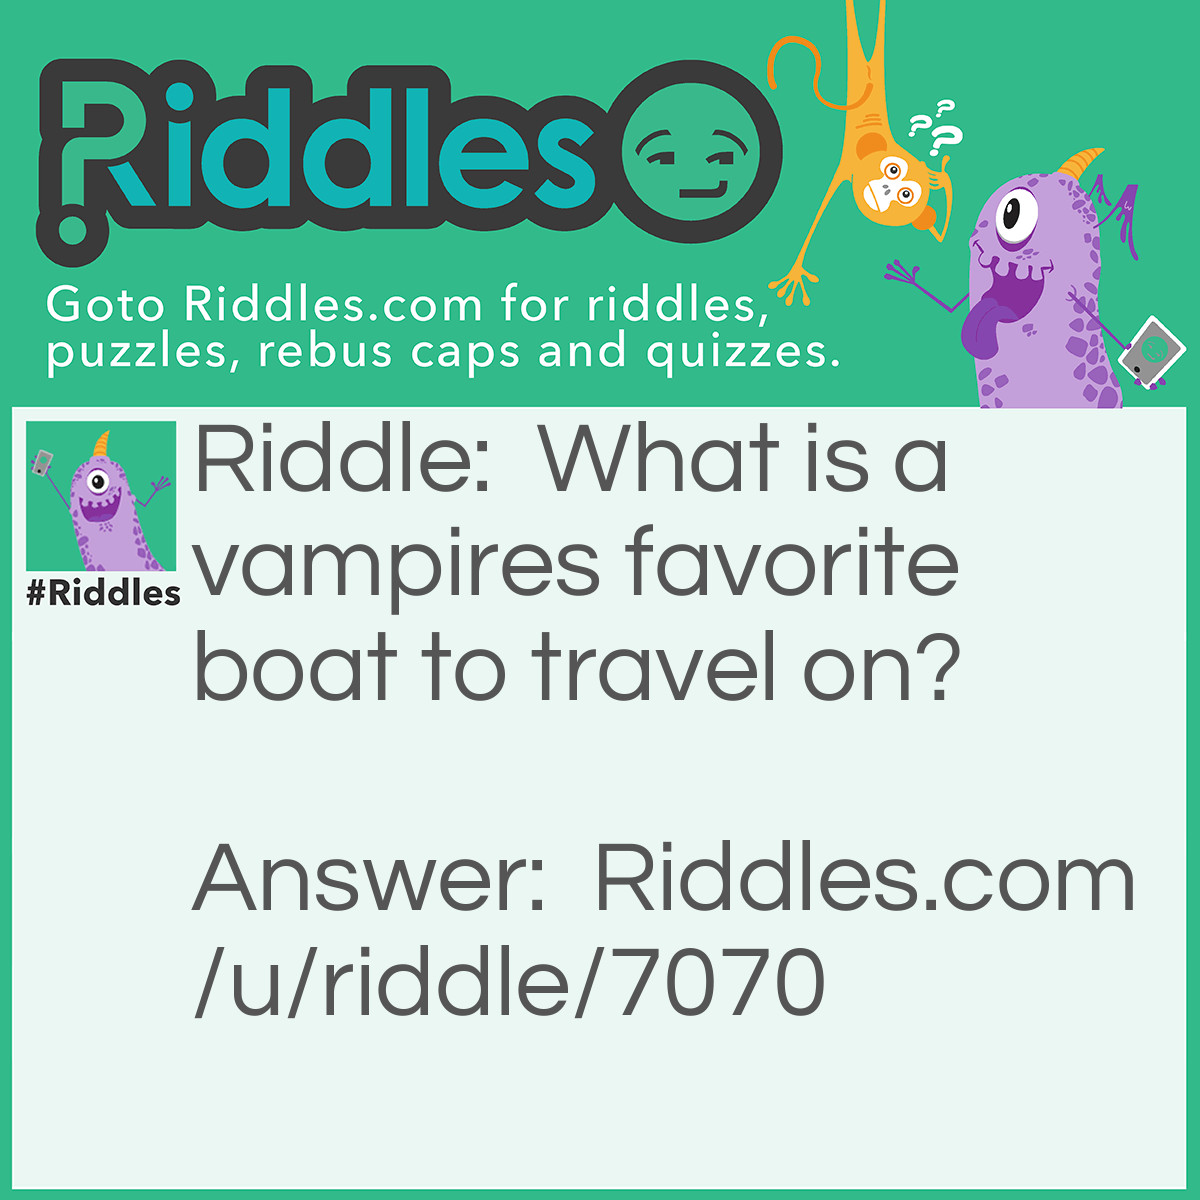 Riddle: What is a vampires favorite boat to travel on? Answer: A blood vessel.